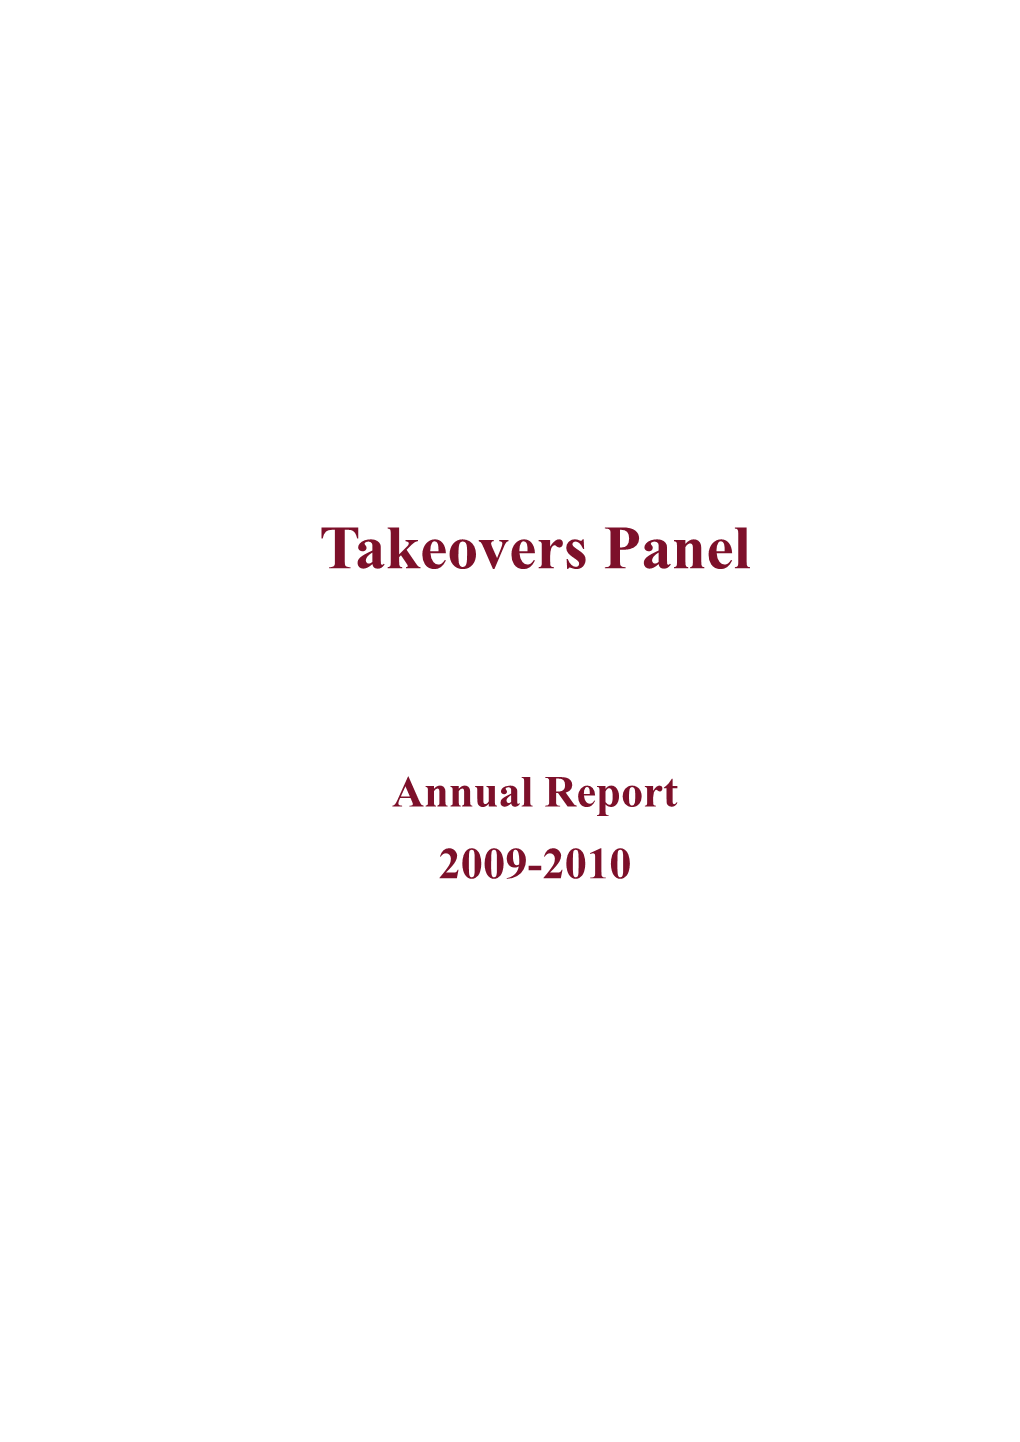 Takeovers Panel Annual Report 2009-10